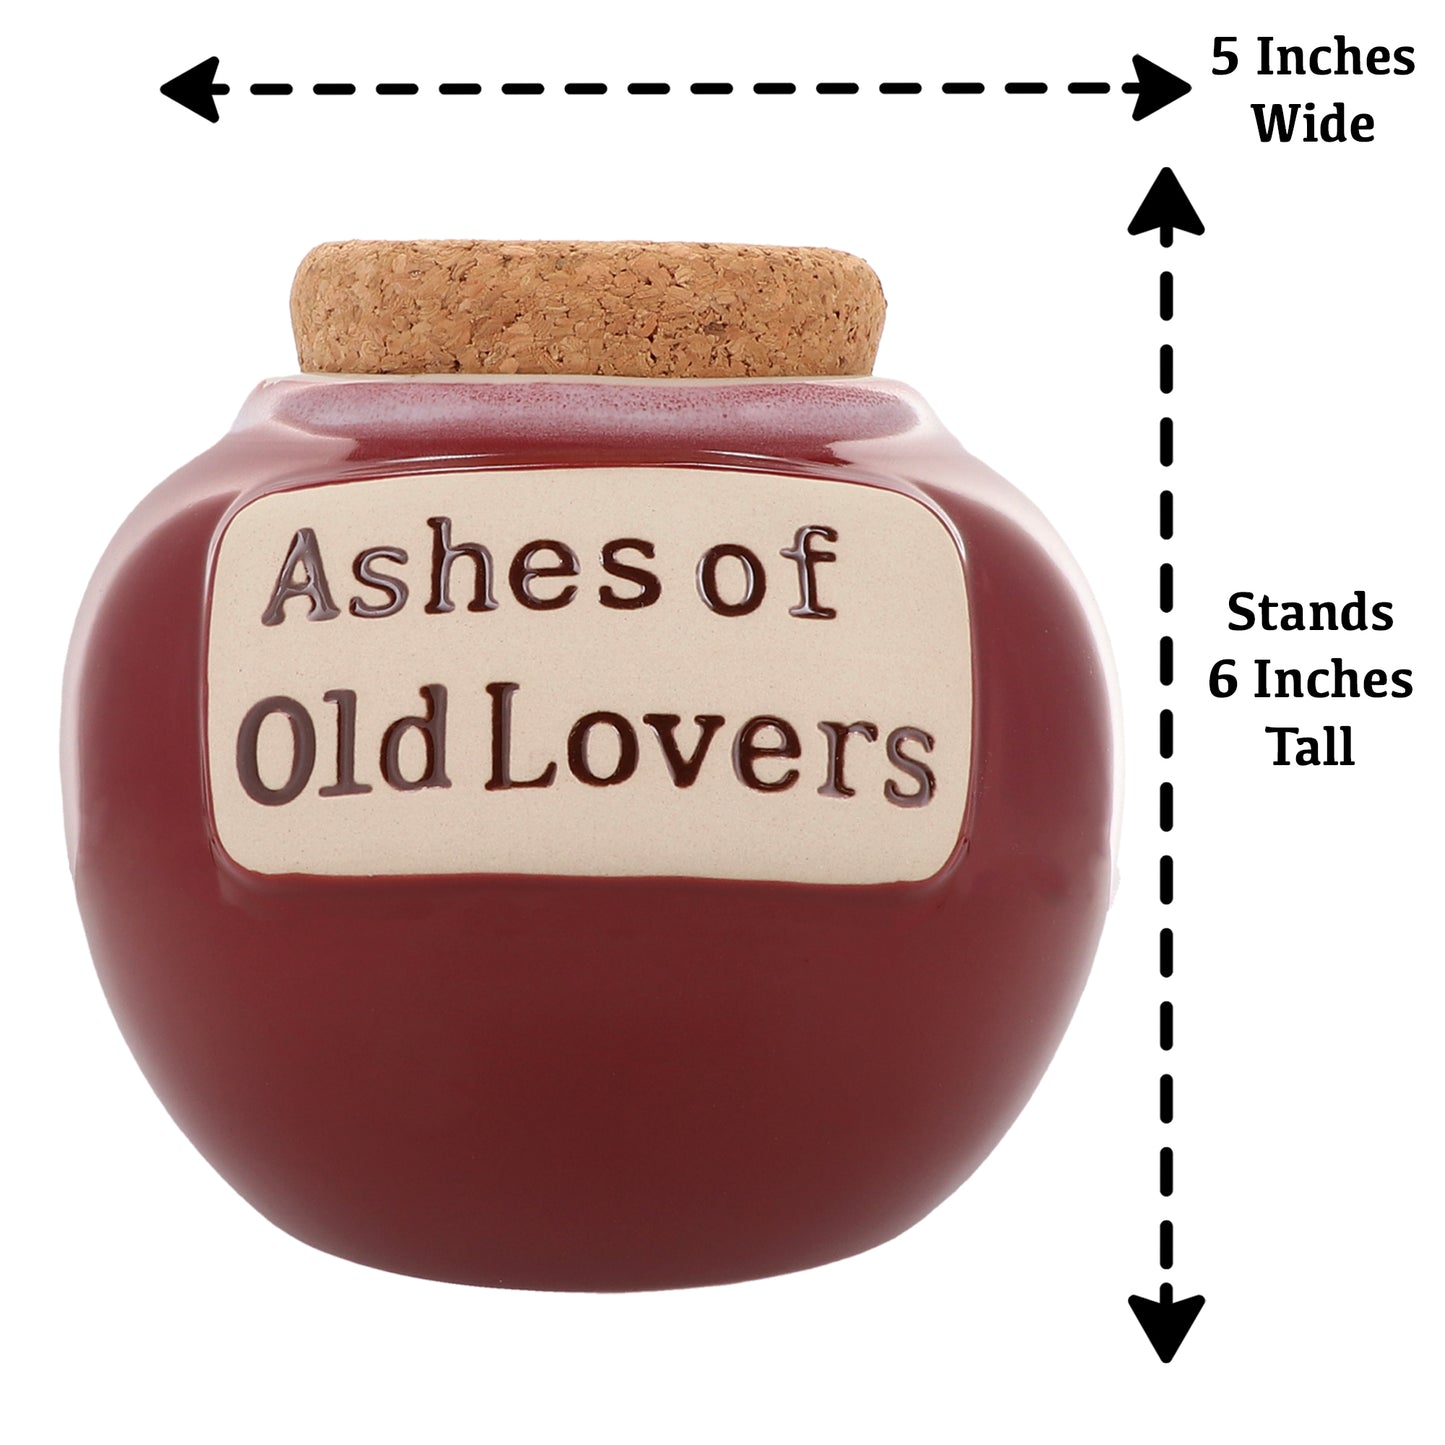 Ashes of Old Lovers Piggy Bank, Red, Ceramic